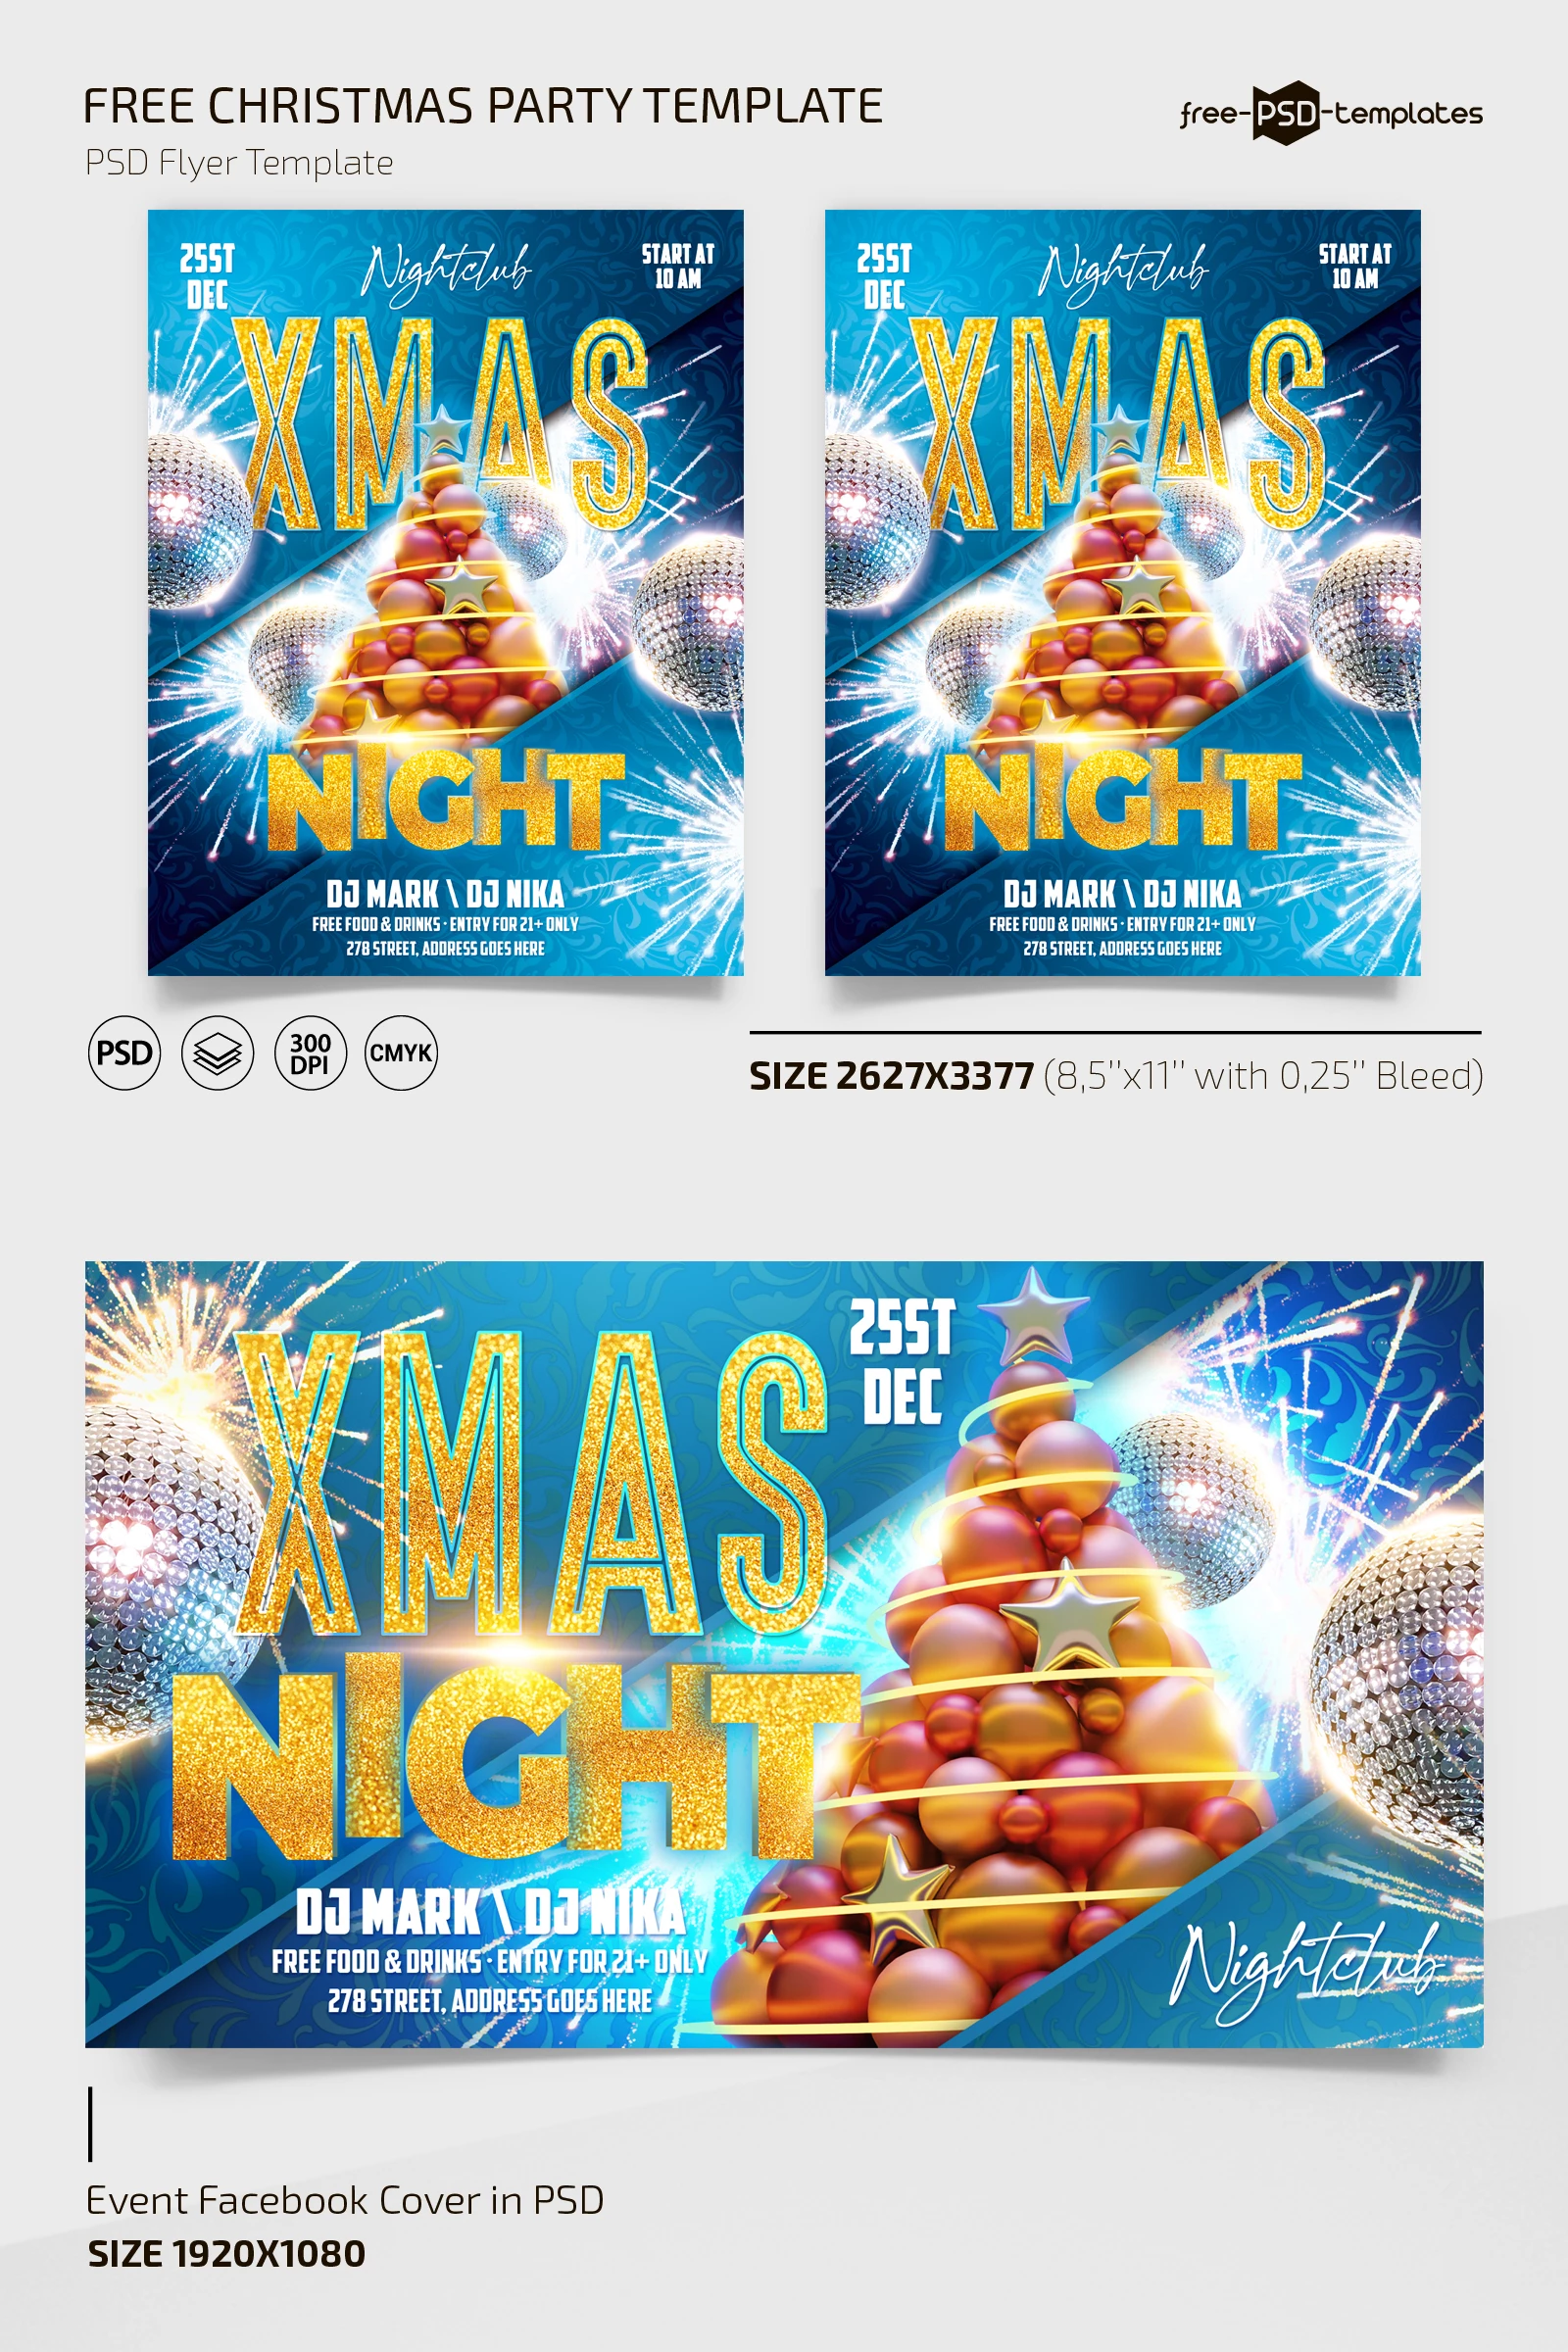 Free Christmas Party Flyer Template + Instagram Post (PSD)